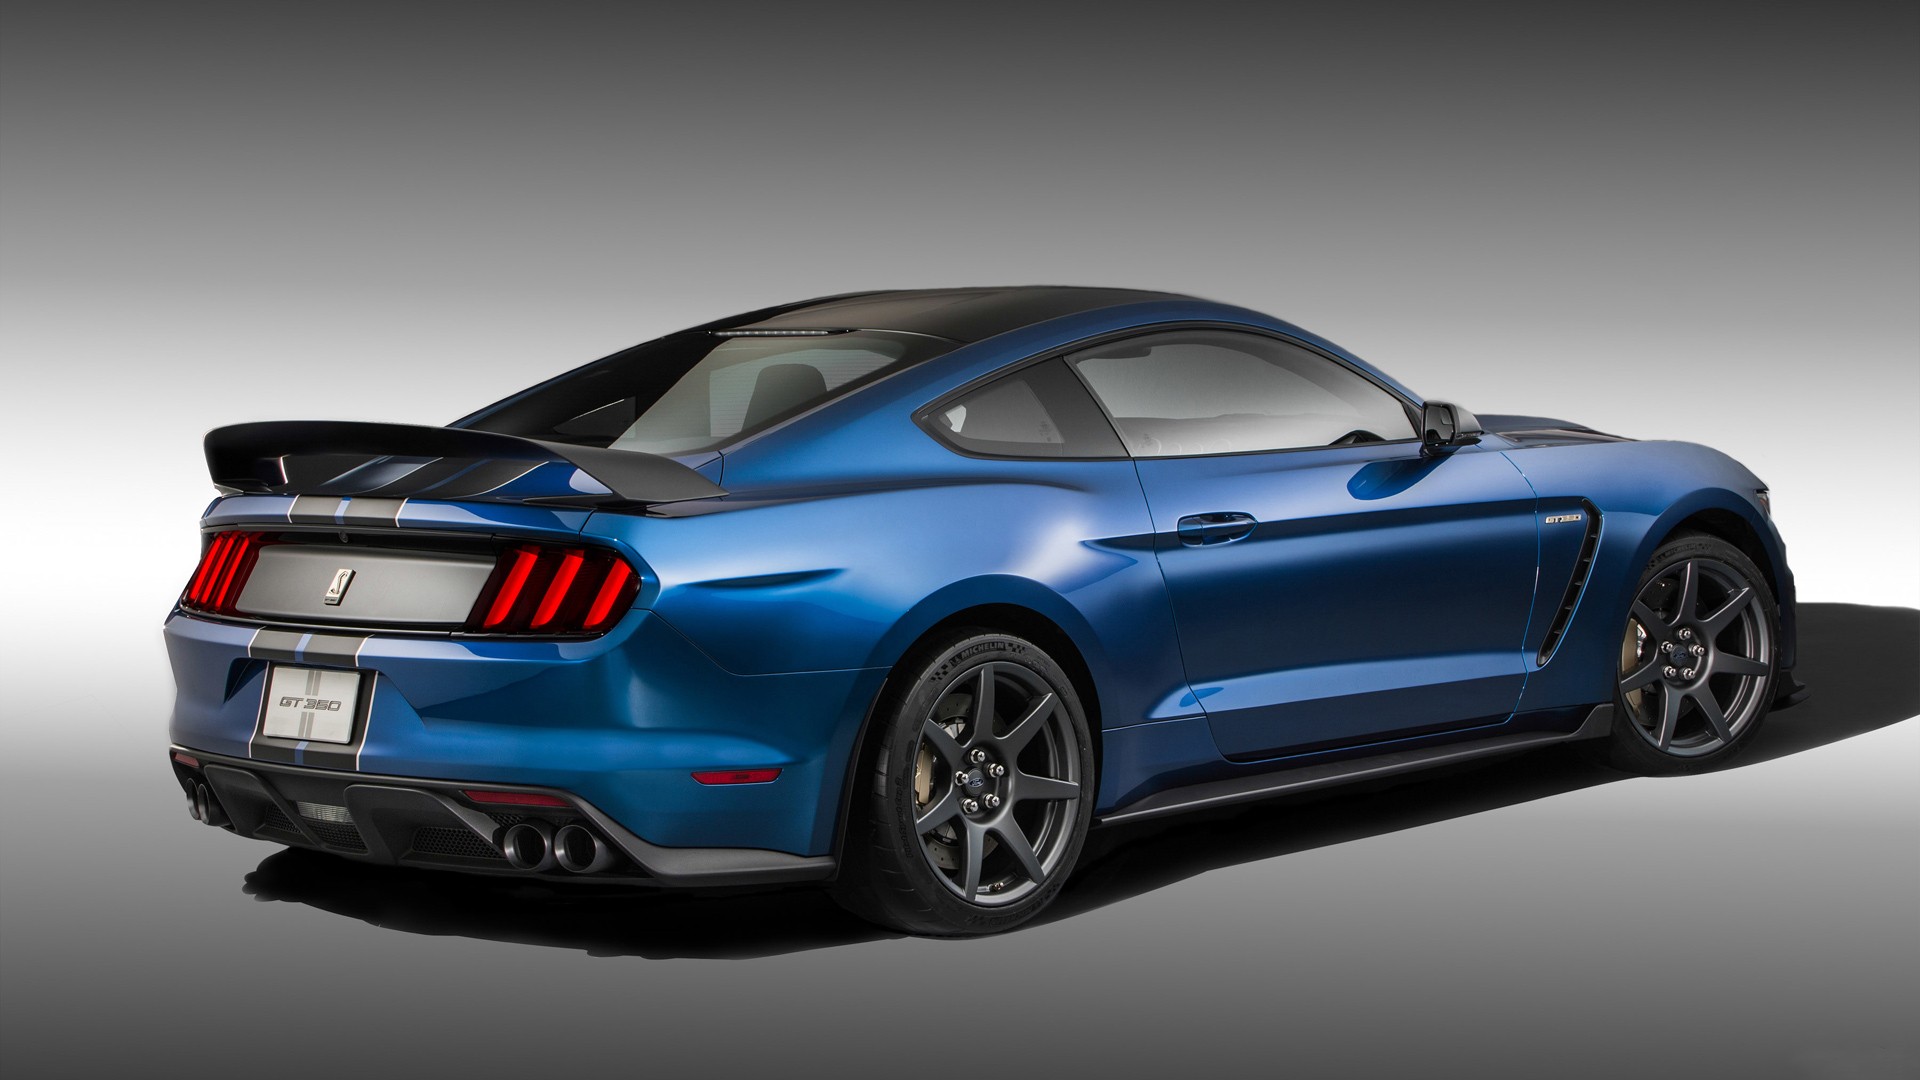 Ford Mustang Shelby, Shelby GT350, Car, Blue Cars Wallpaper